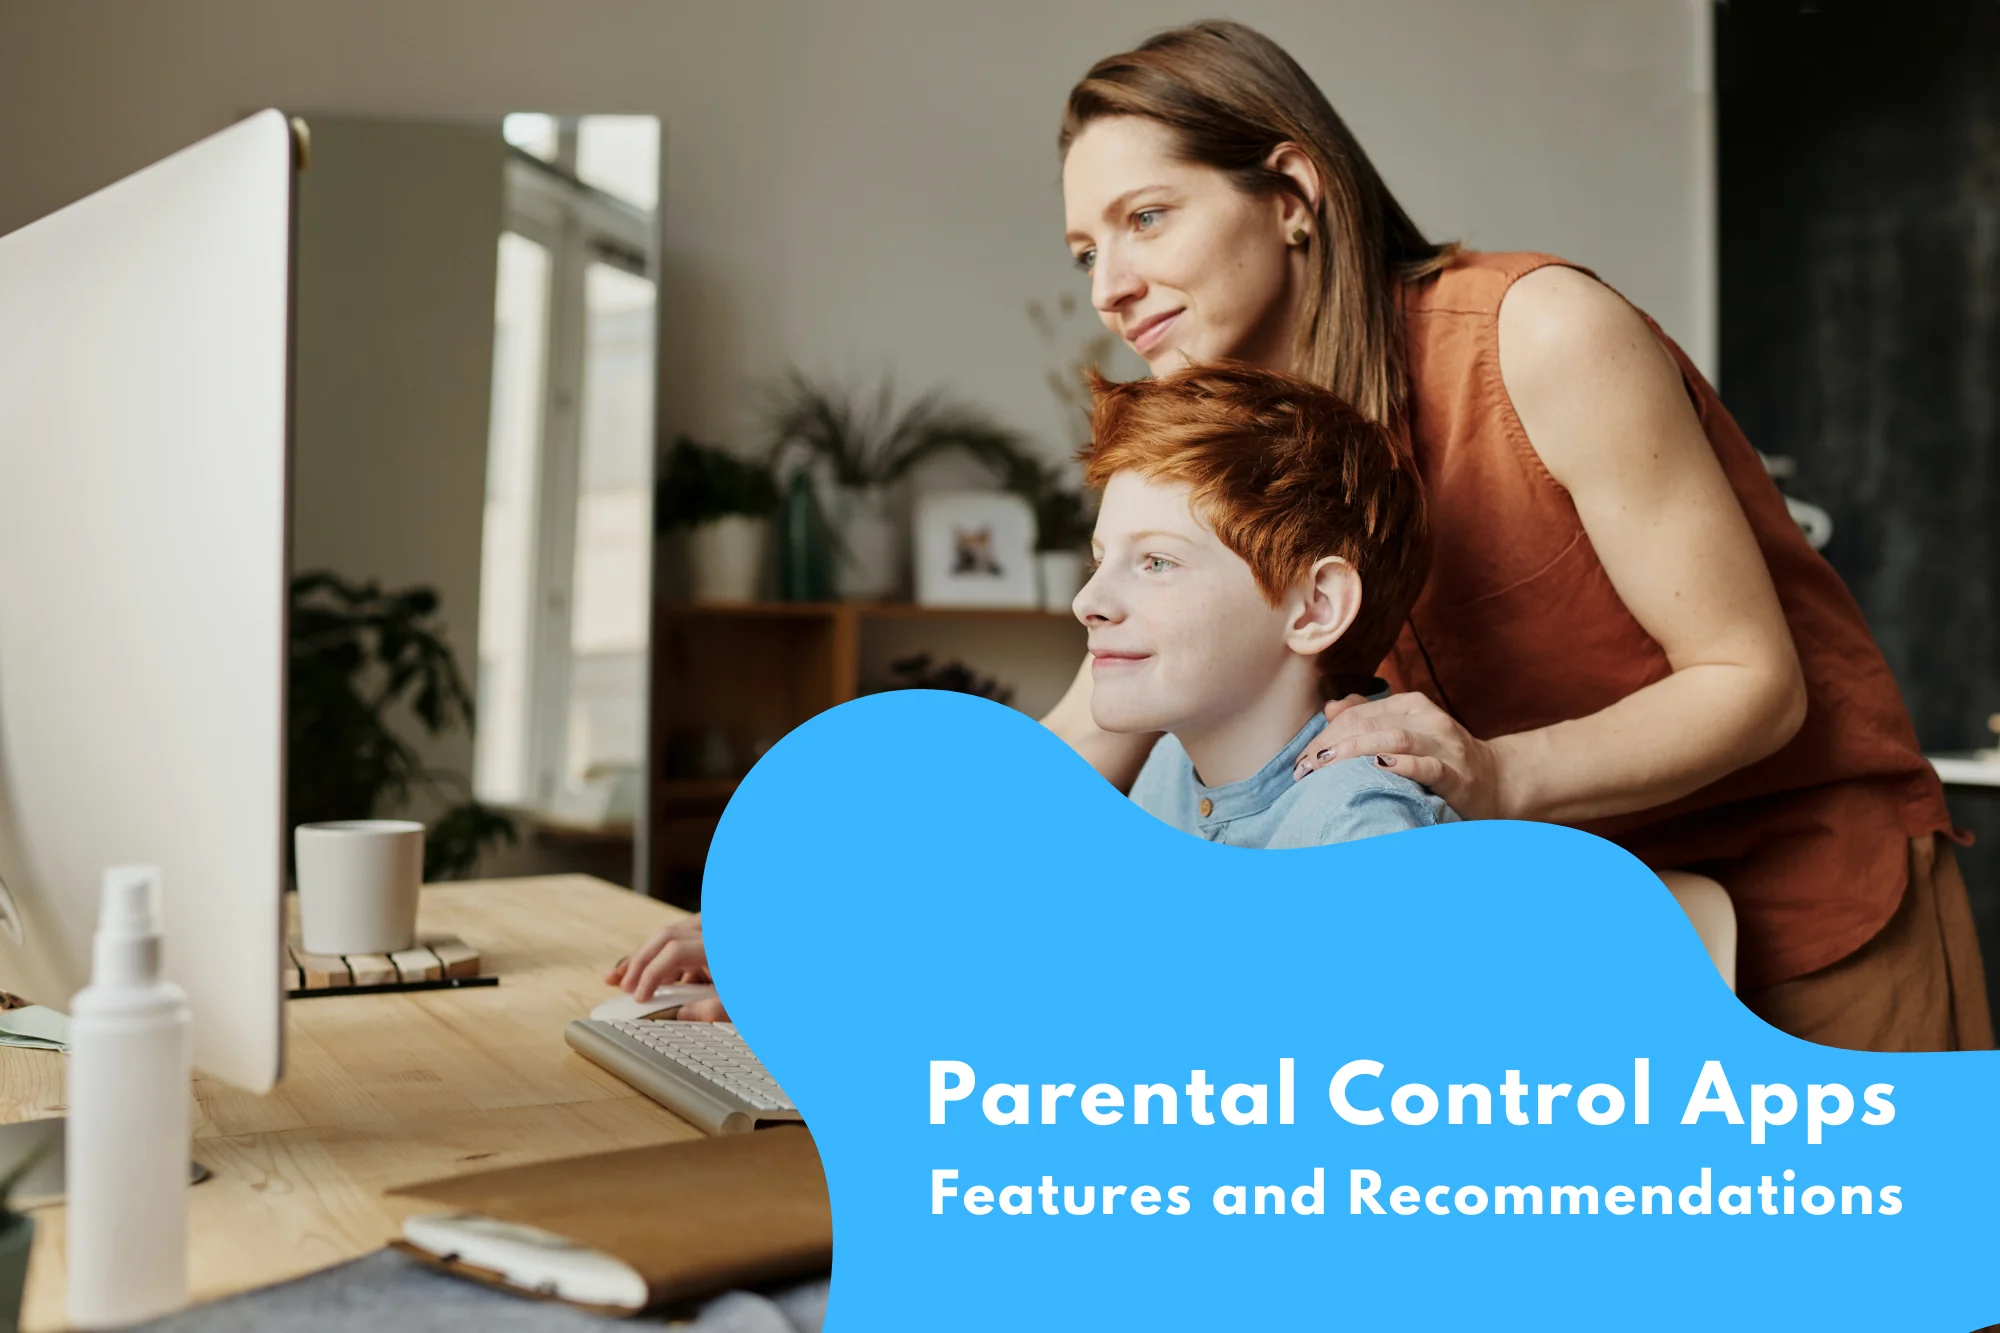 Parental Control Apps: Features and Recommendations